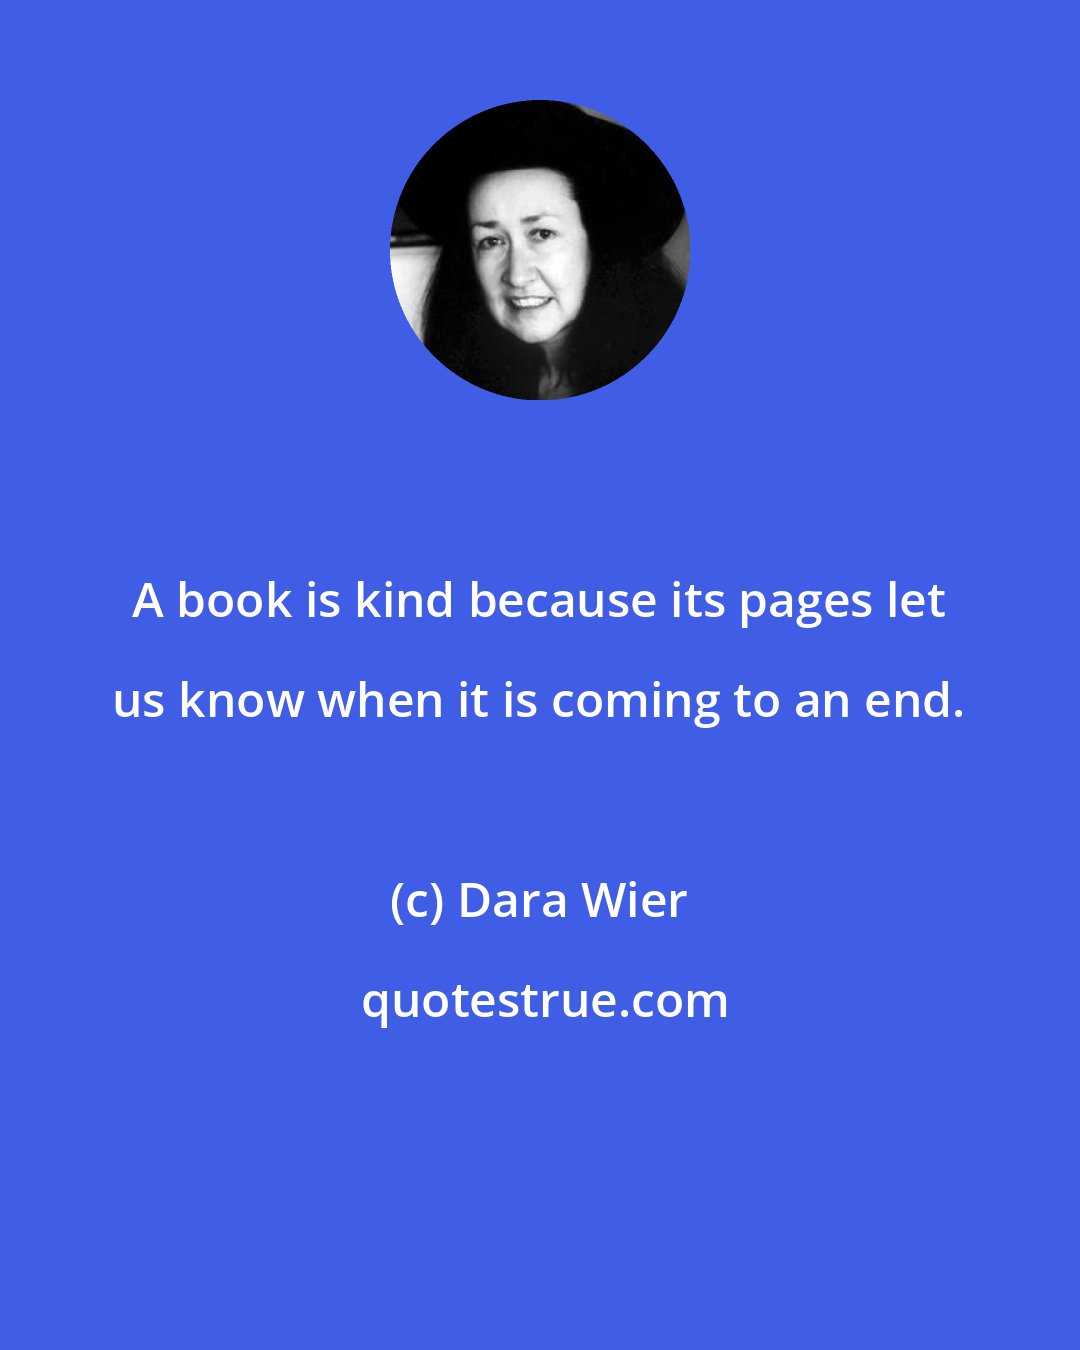 Dara Wier: A book is kind because its pages let us know when it is coming to an end.